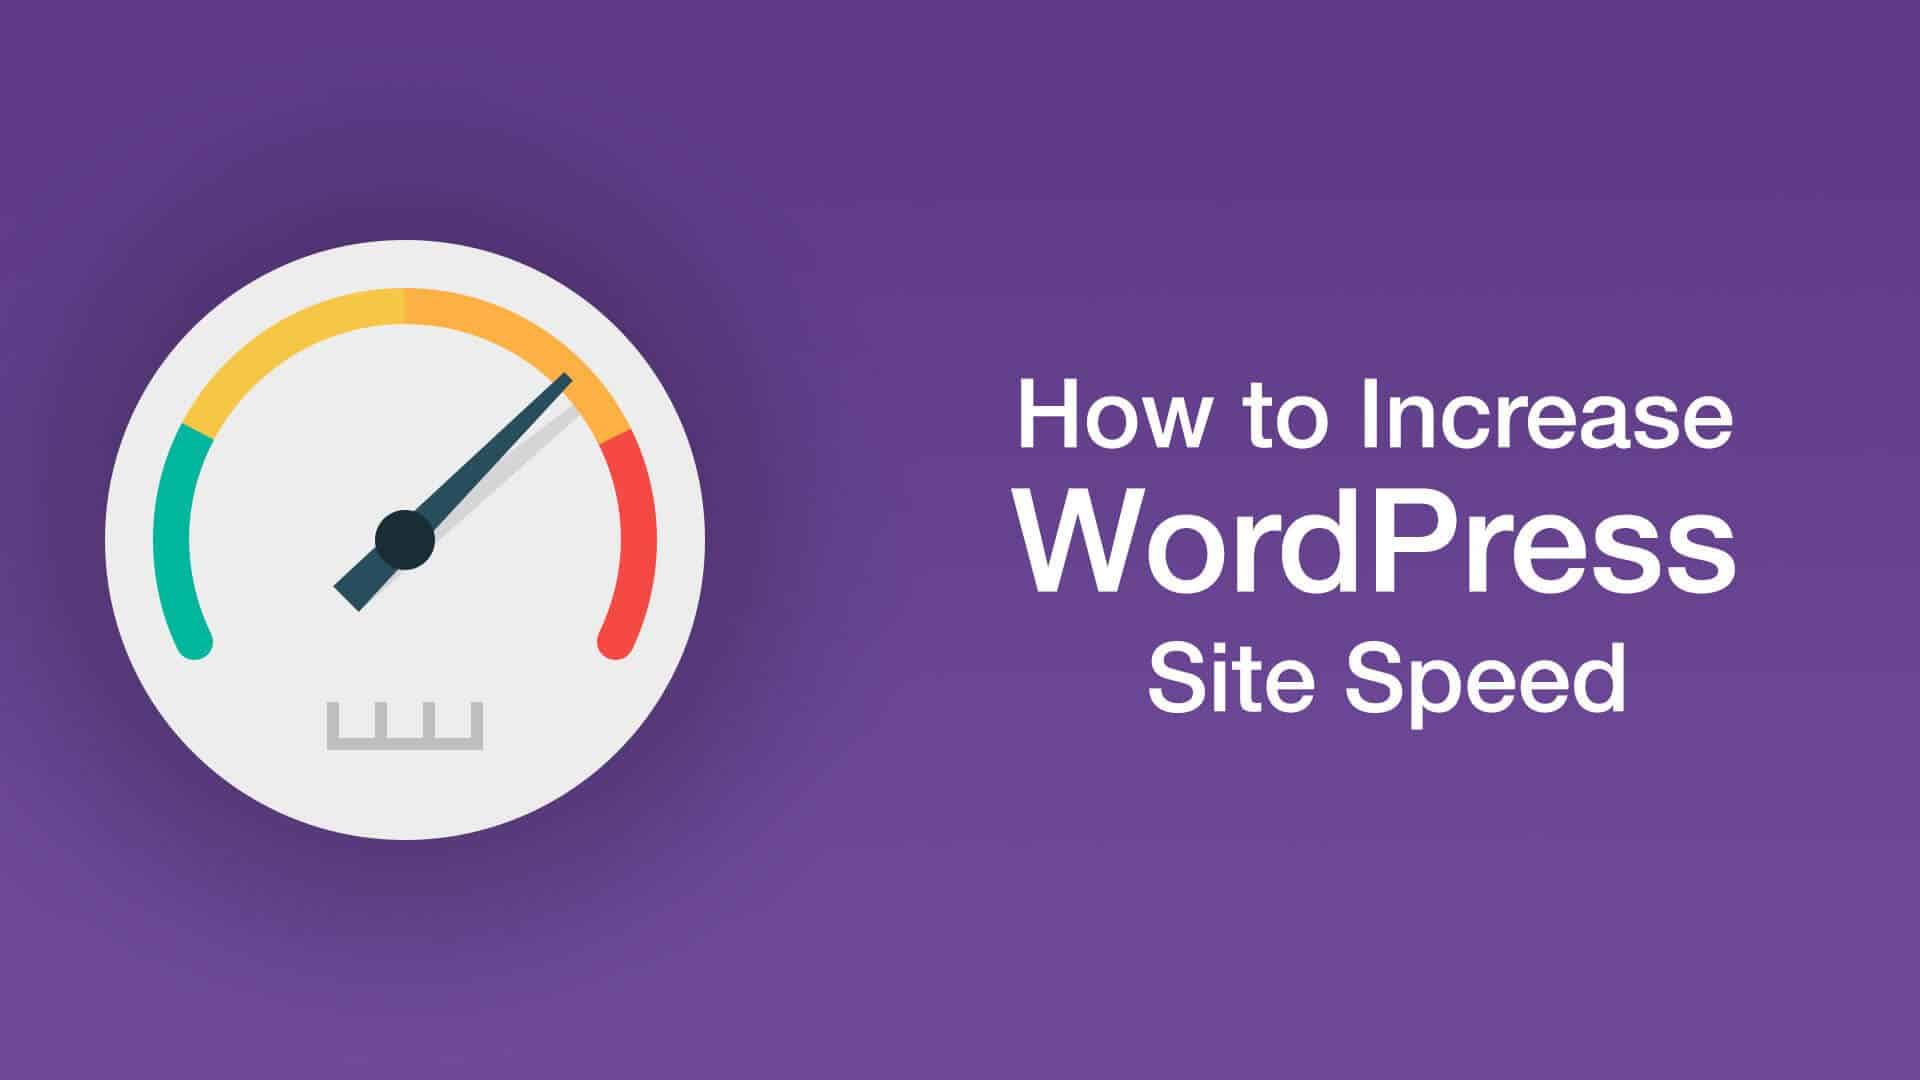 How to increase site speed